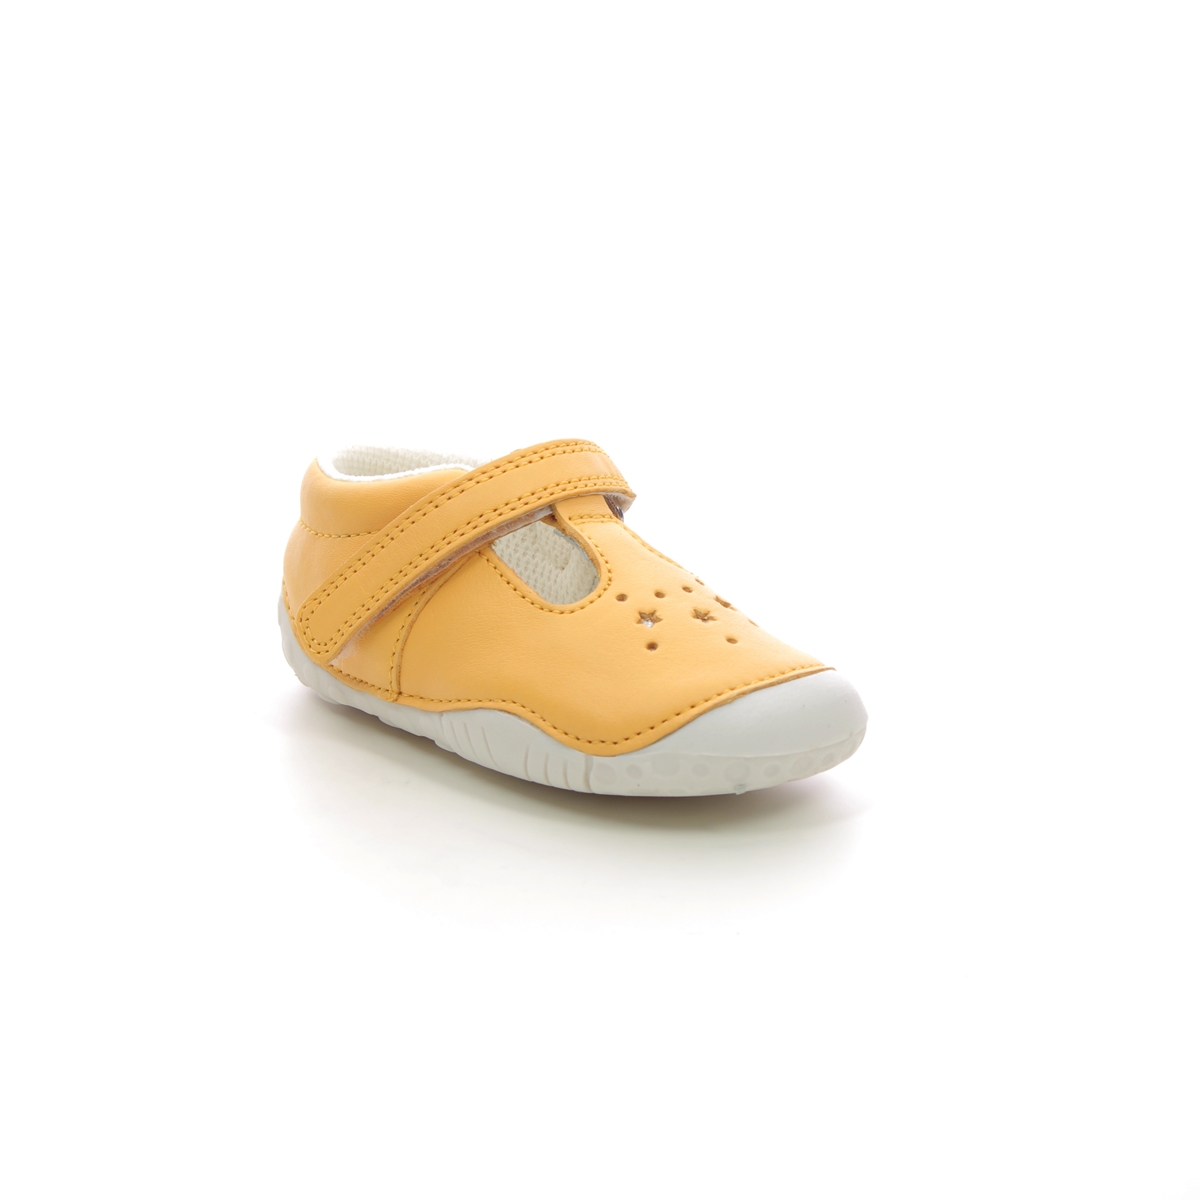 Start Rite Tumble T Bar Yellow Kids girls first and baby shoes 0761-07G in a Plain Leather in Size 2